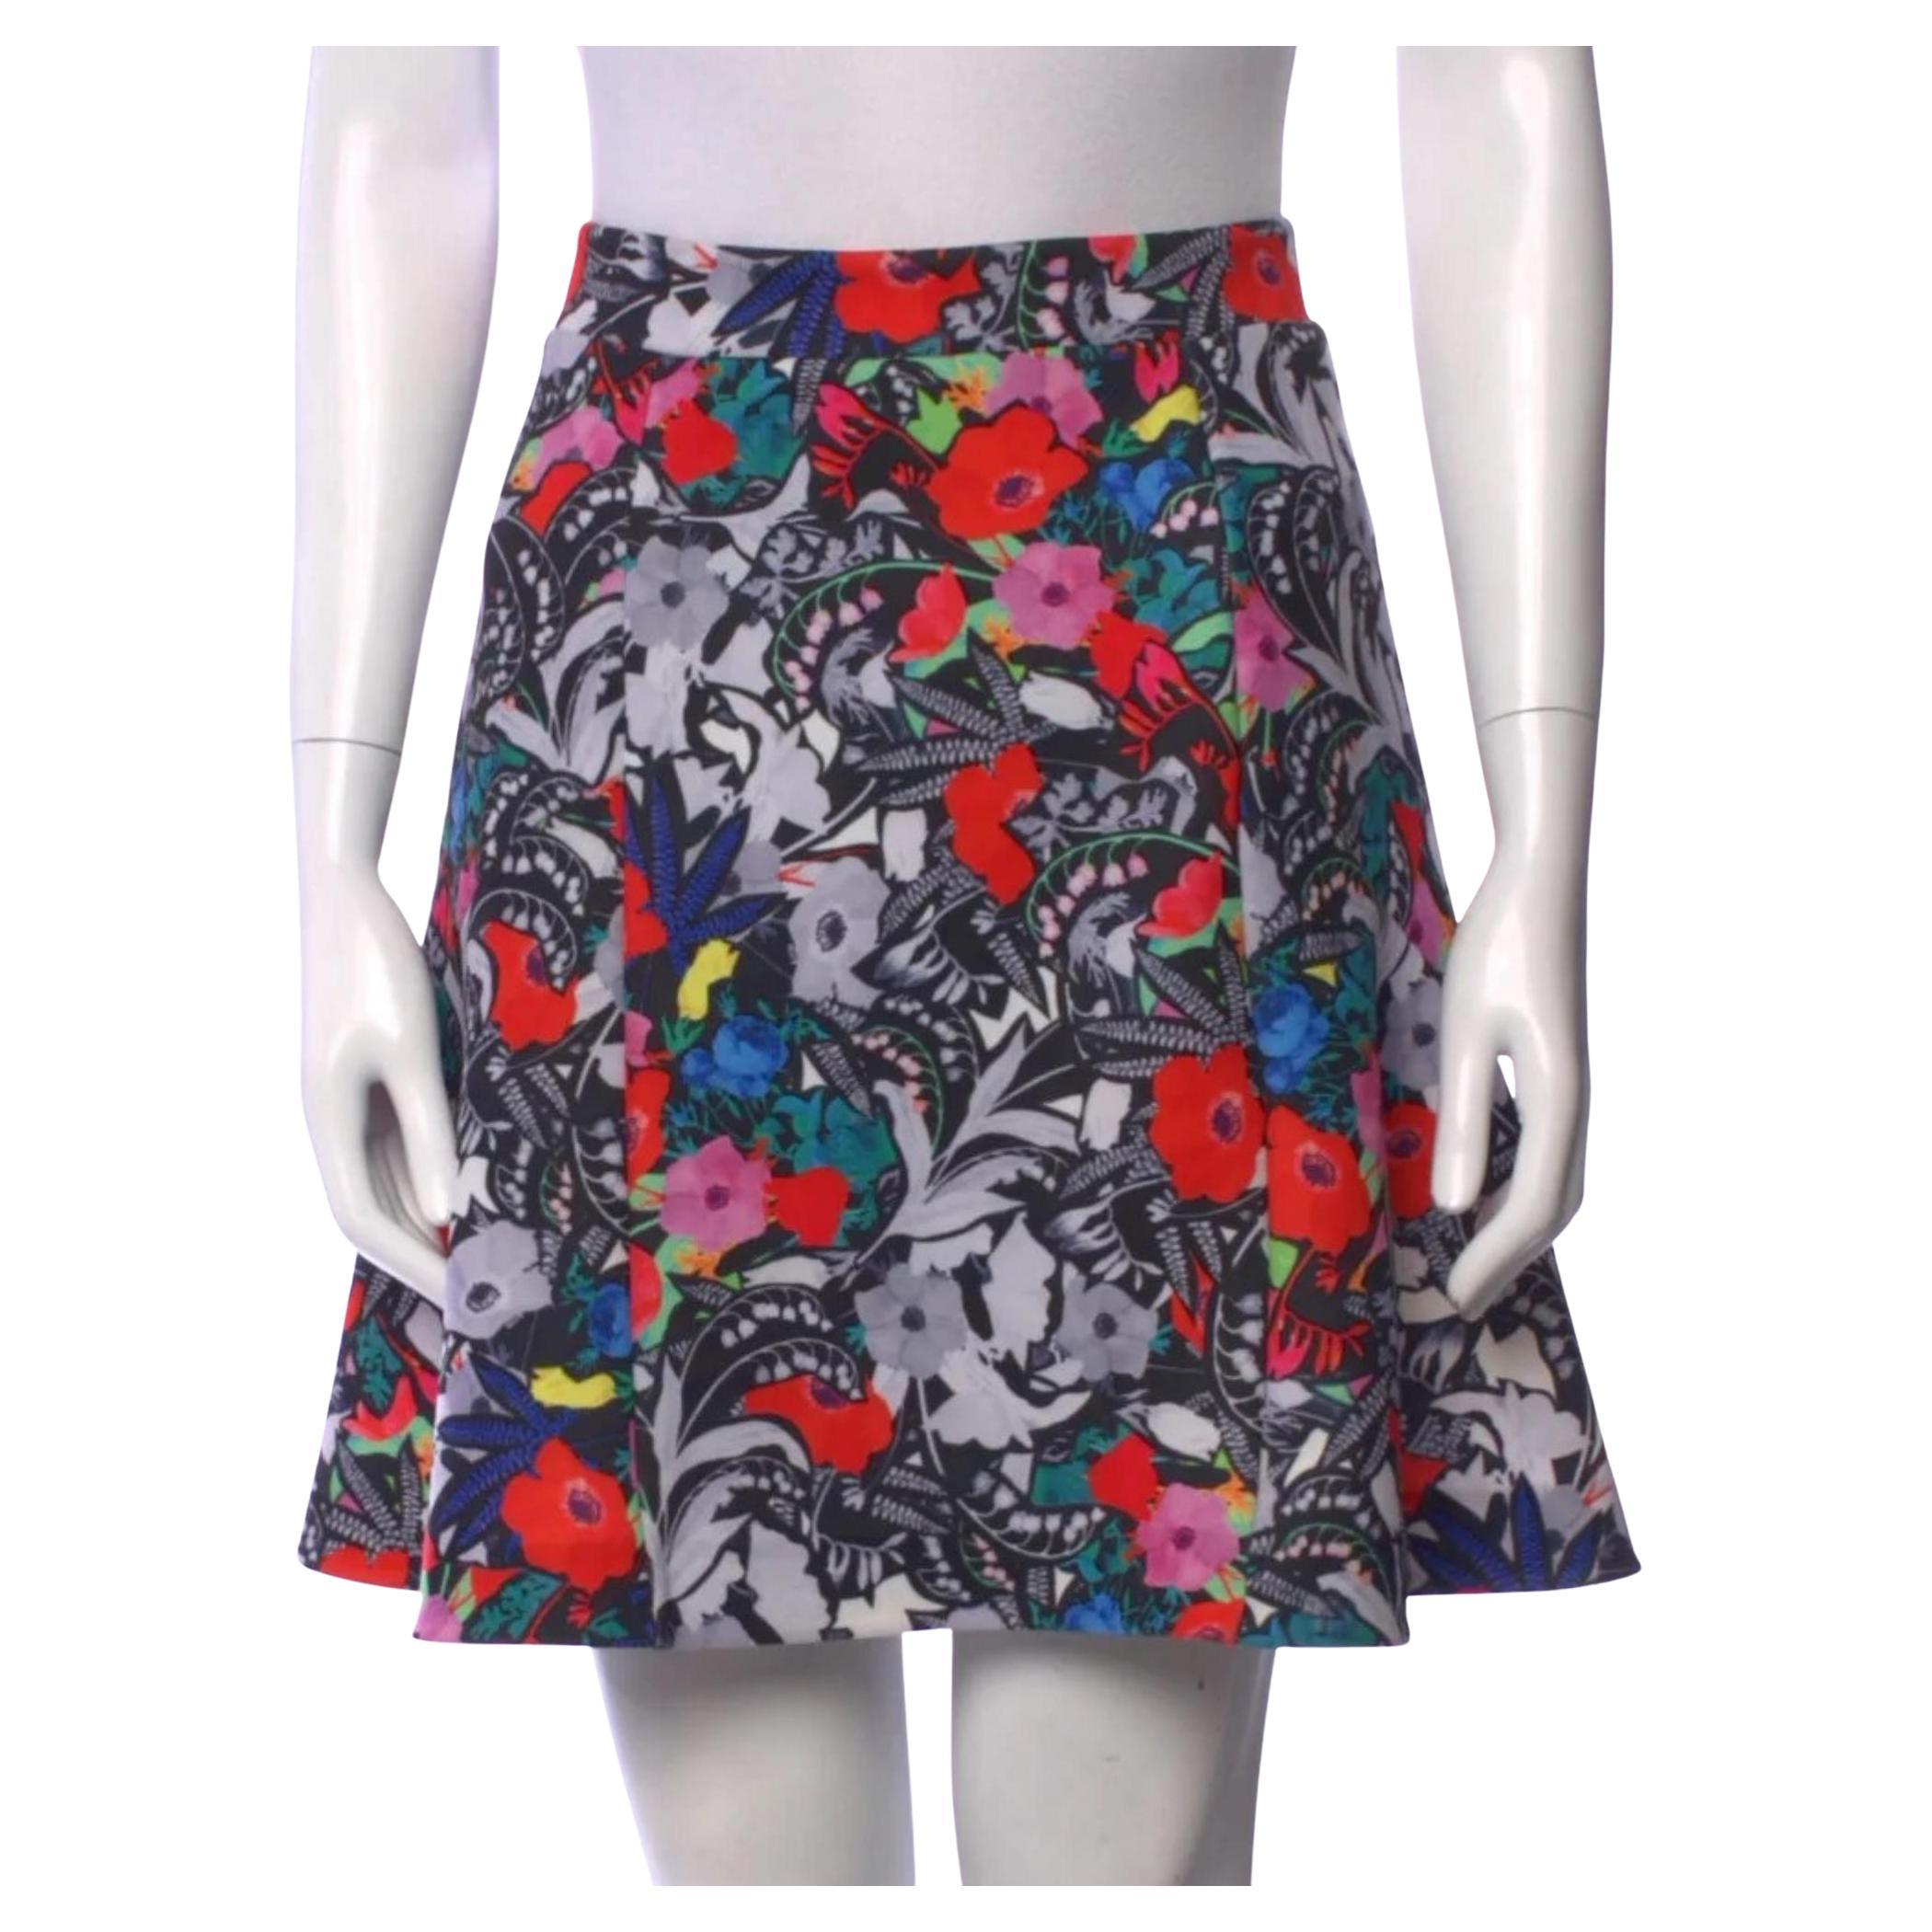 Sonia by Sonia Rykiel Floral Print Mini Skirt (Small) For Sale